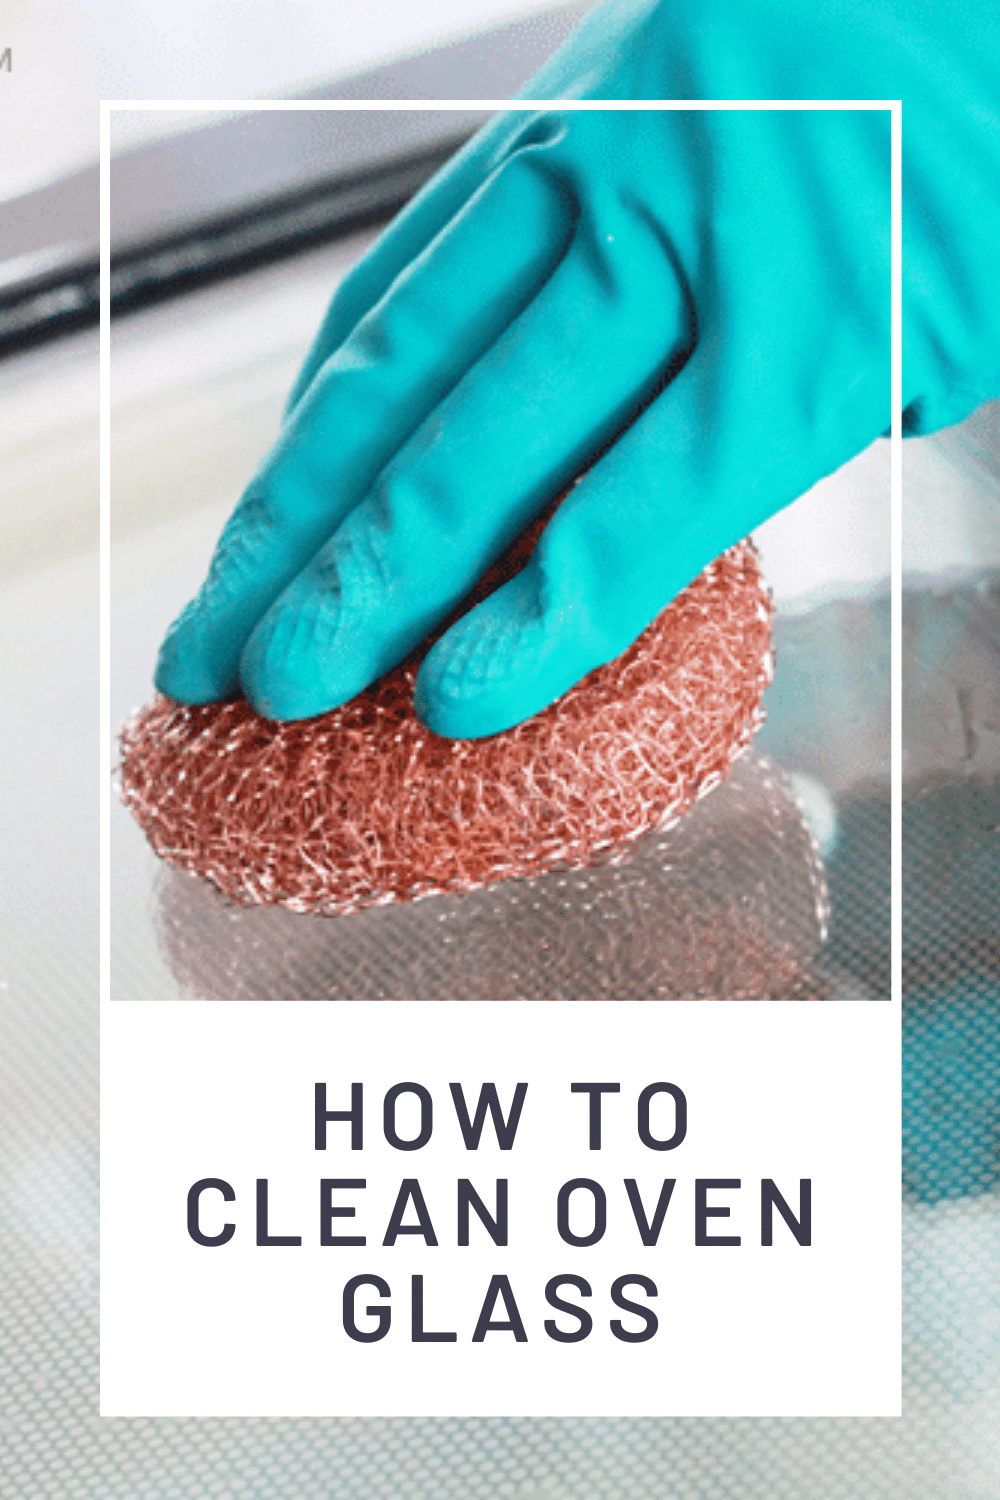 Cleaning the oven is no fun, but it's even less fun when your cleaning method is ineffective. Follow our step-by-step guide to clean your oven glass quickly and thoroughly, with no expensive products required. via @somewhatsimple